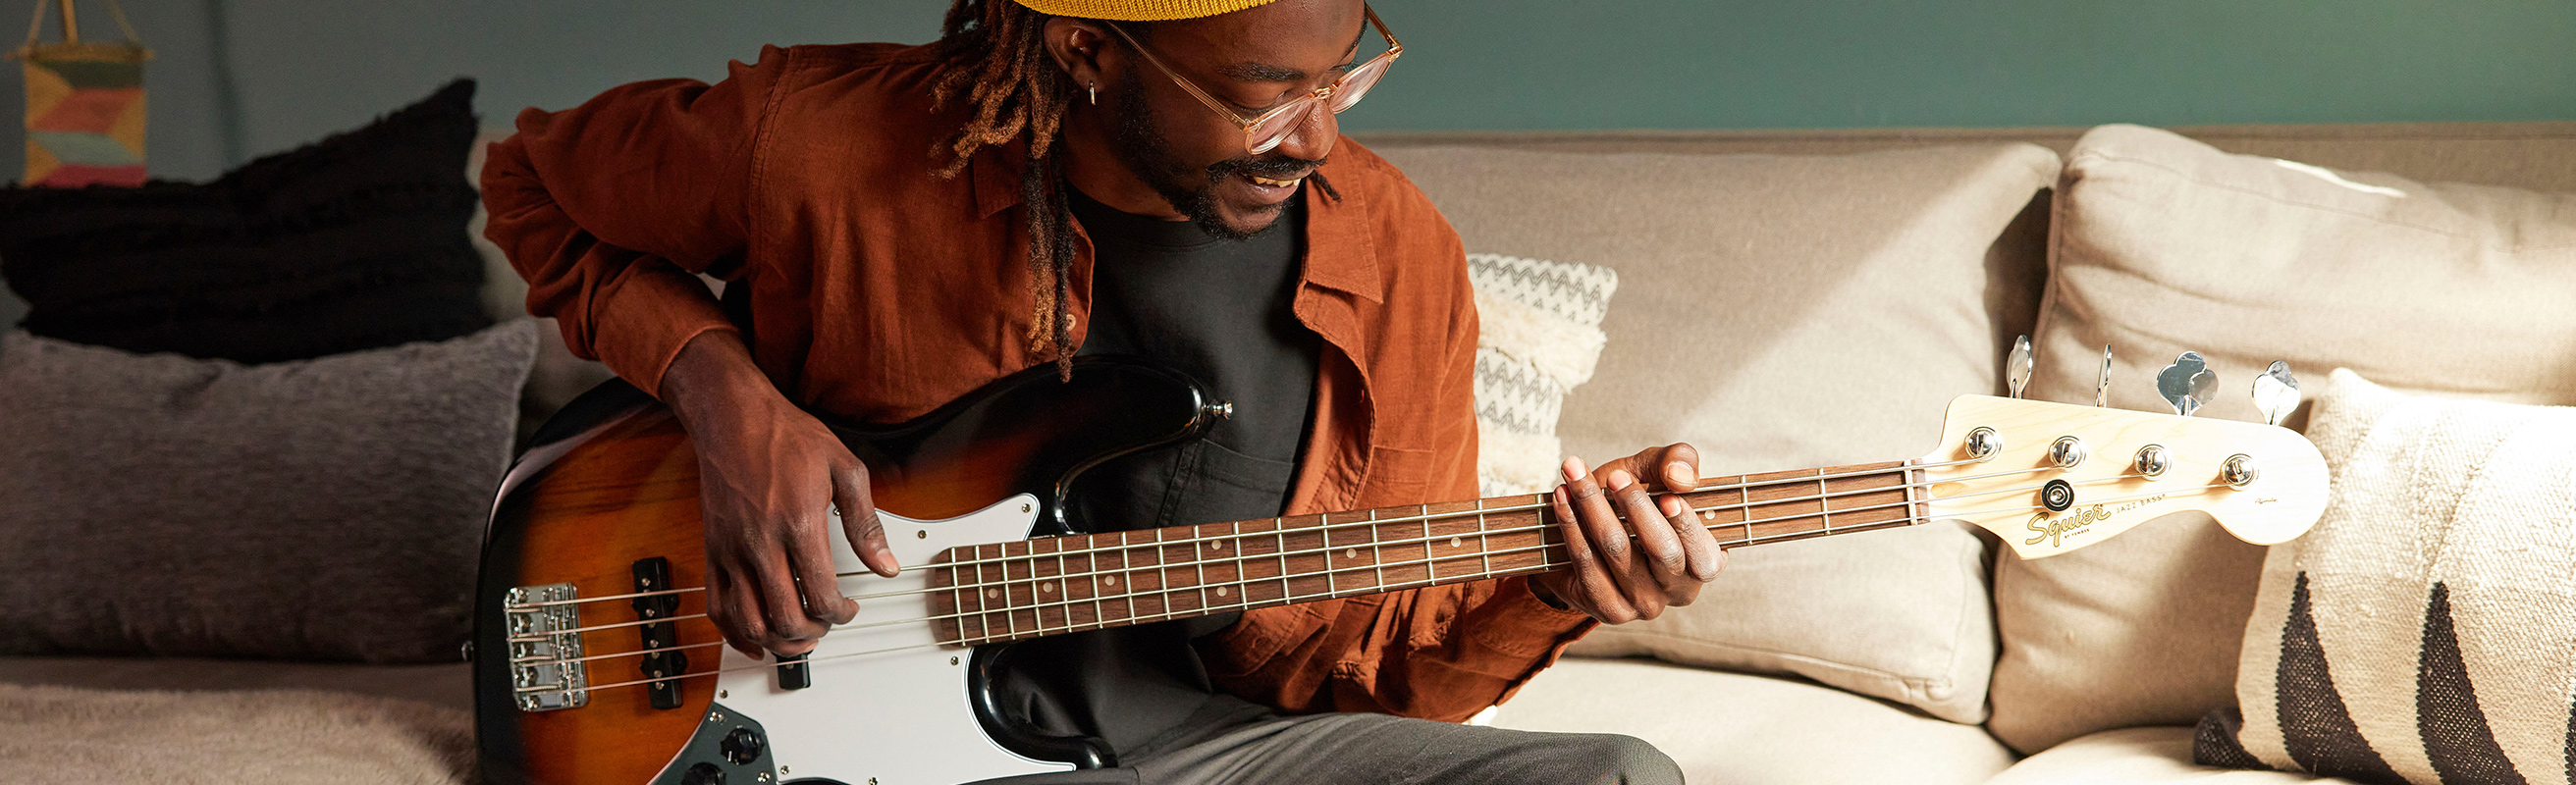 How to play bass guitar, Learn bass in 8 steps